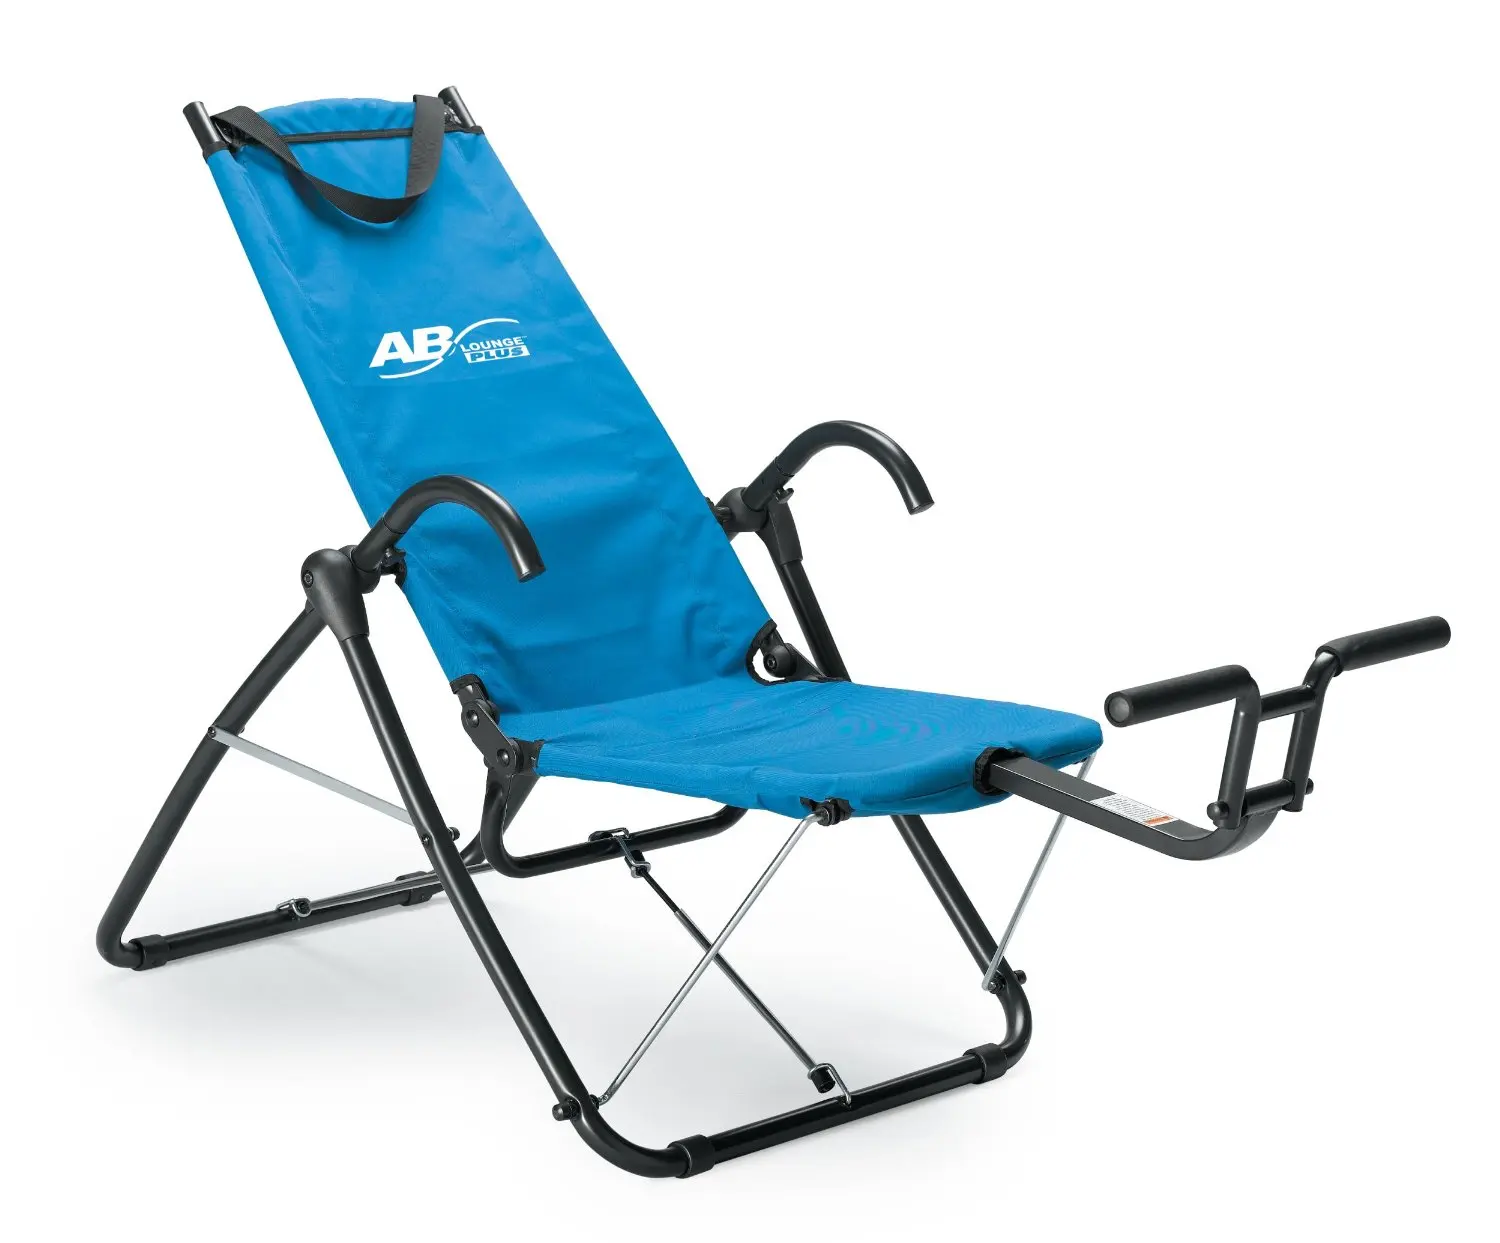 Cheap Ab Lounge For Sale, find Ab Lounge For Sale deals on line at